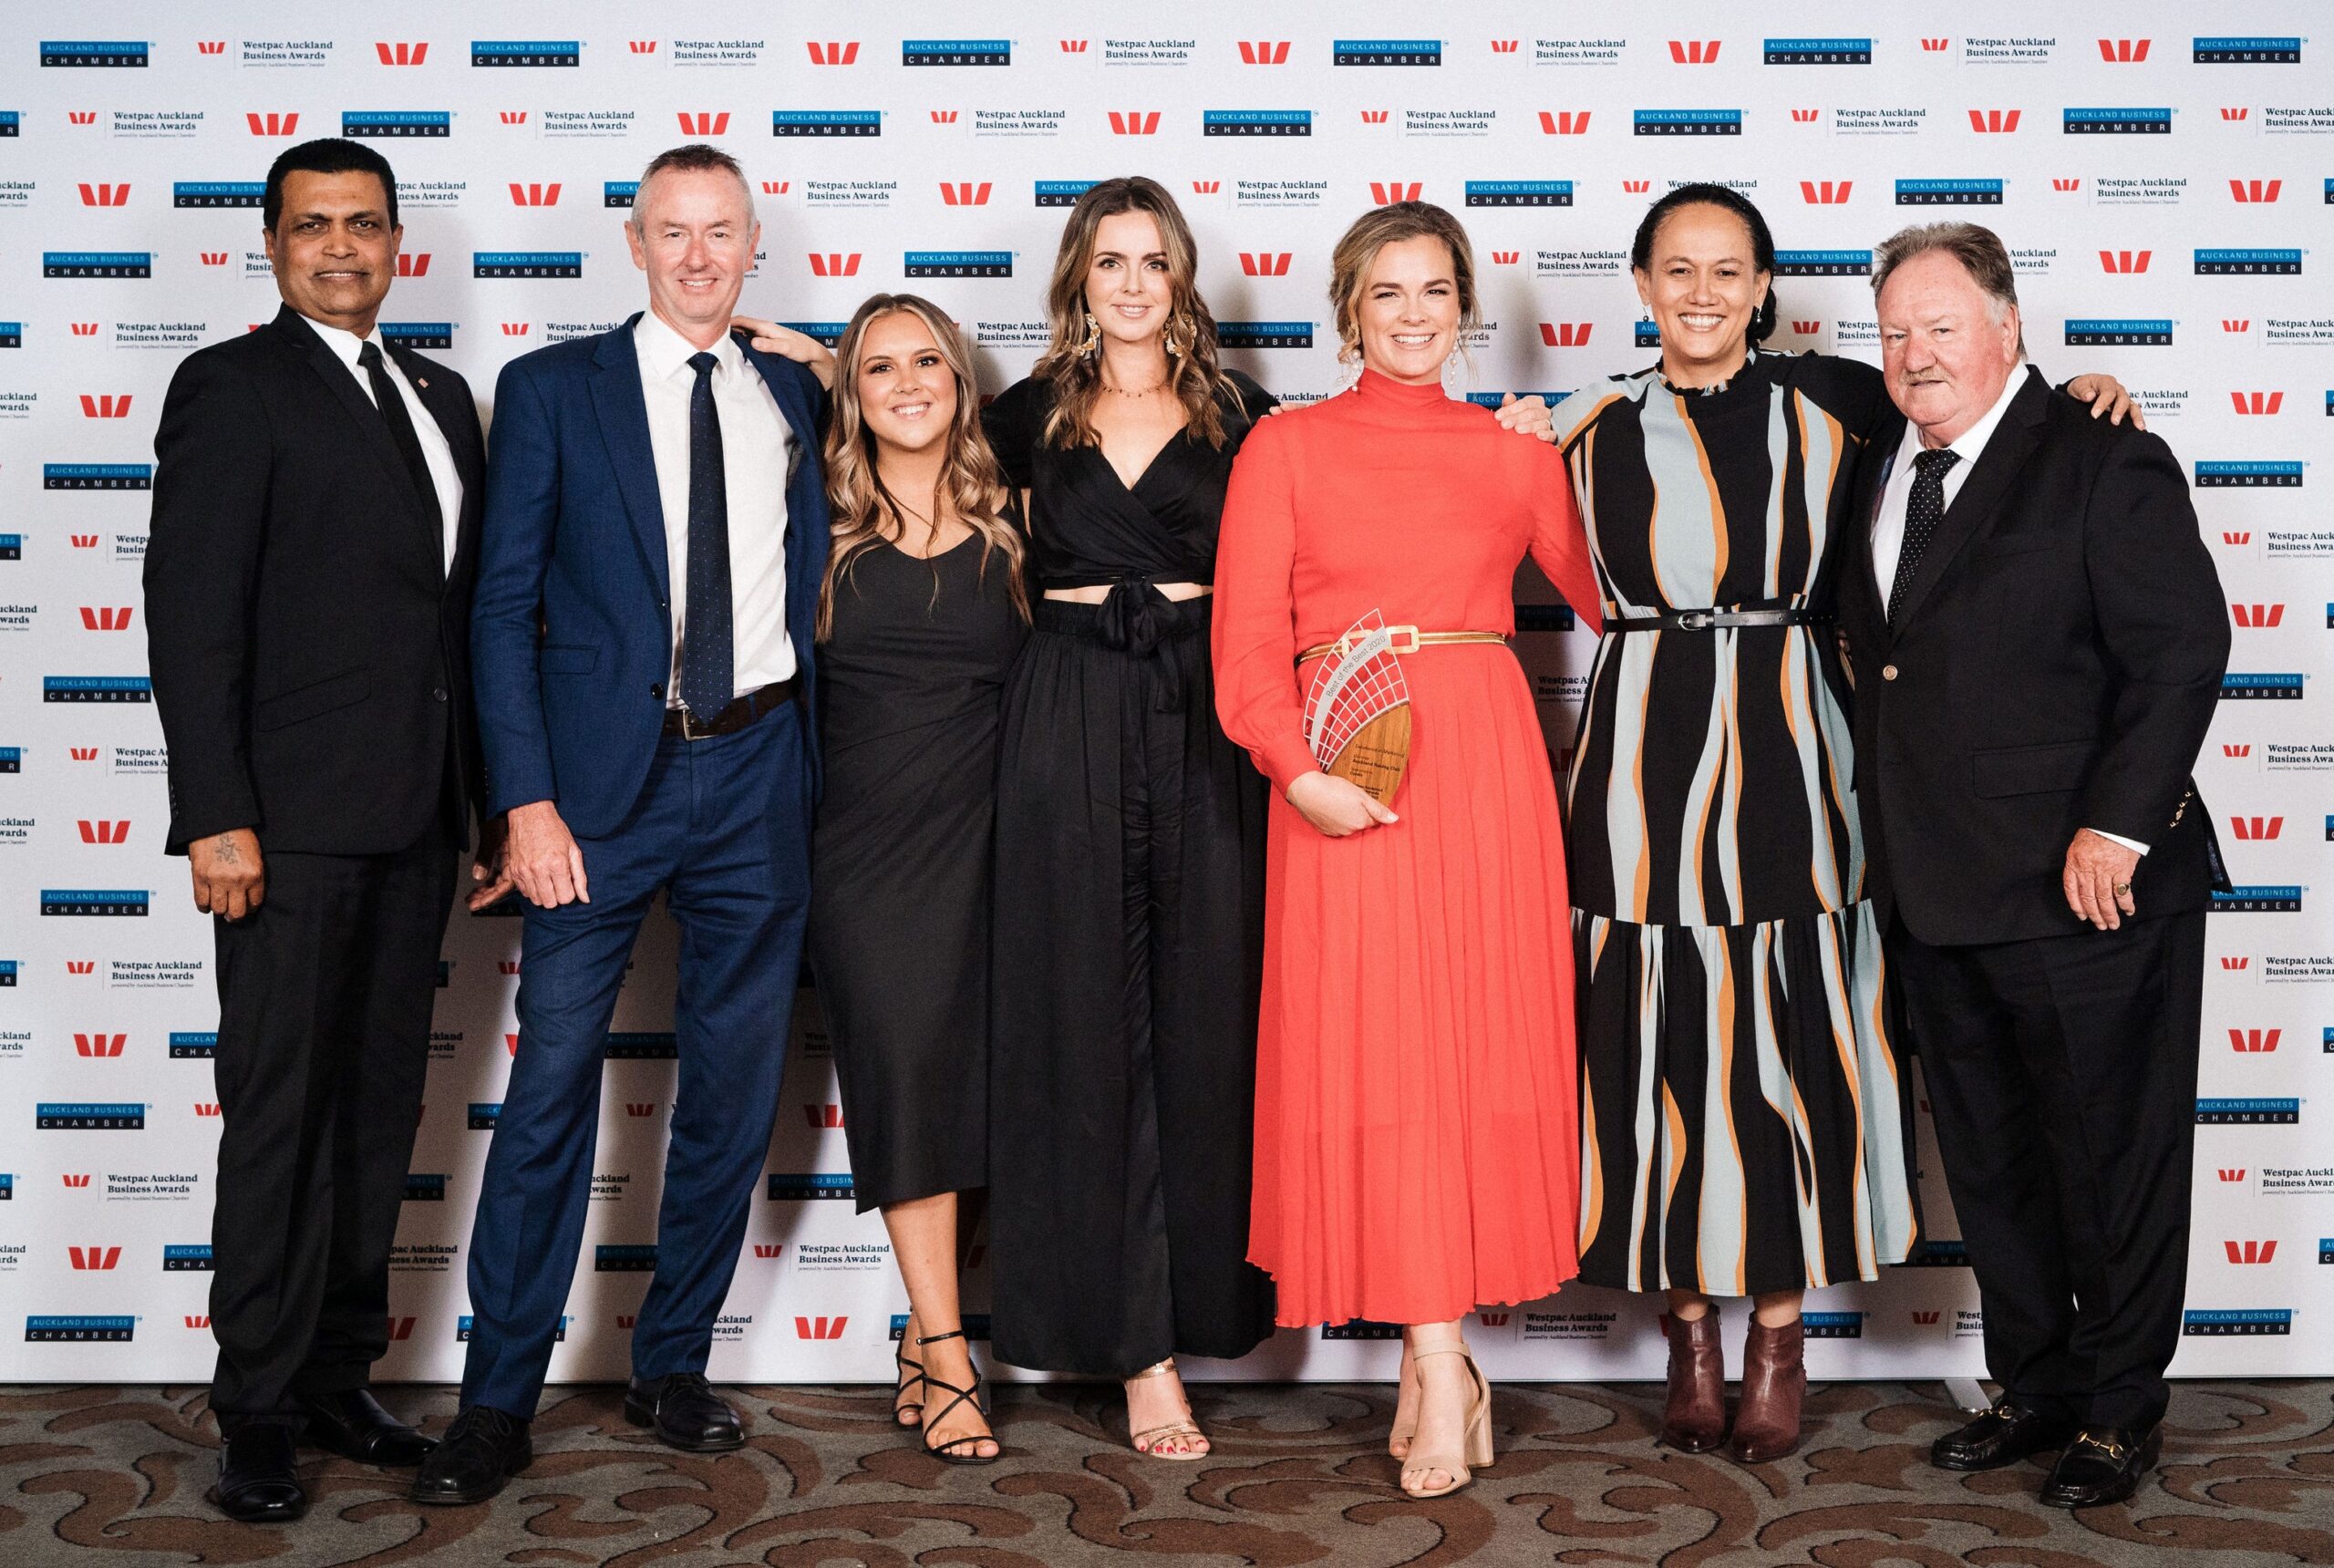 NEWS | Auckland Racing Club wins Best of the Best Award for Excellence in Marketing